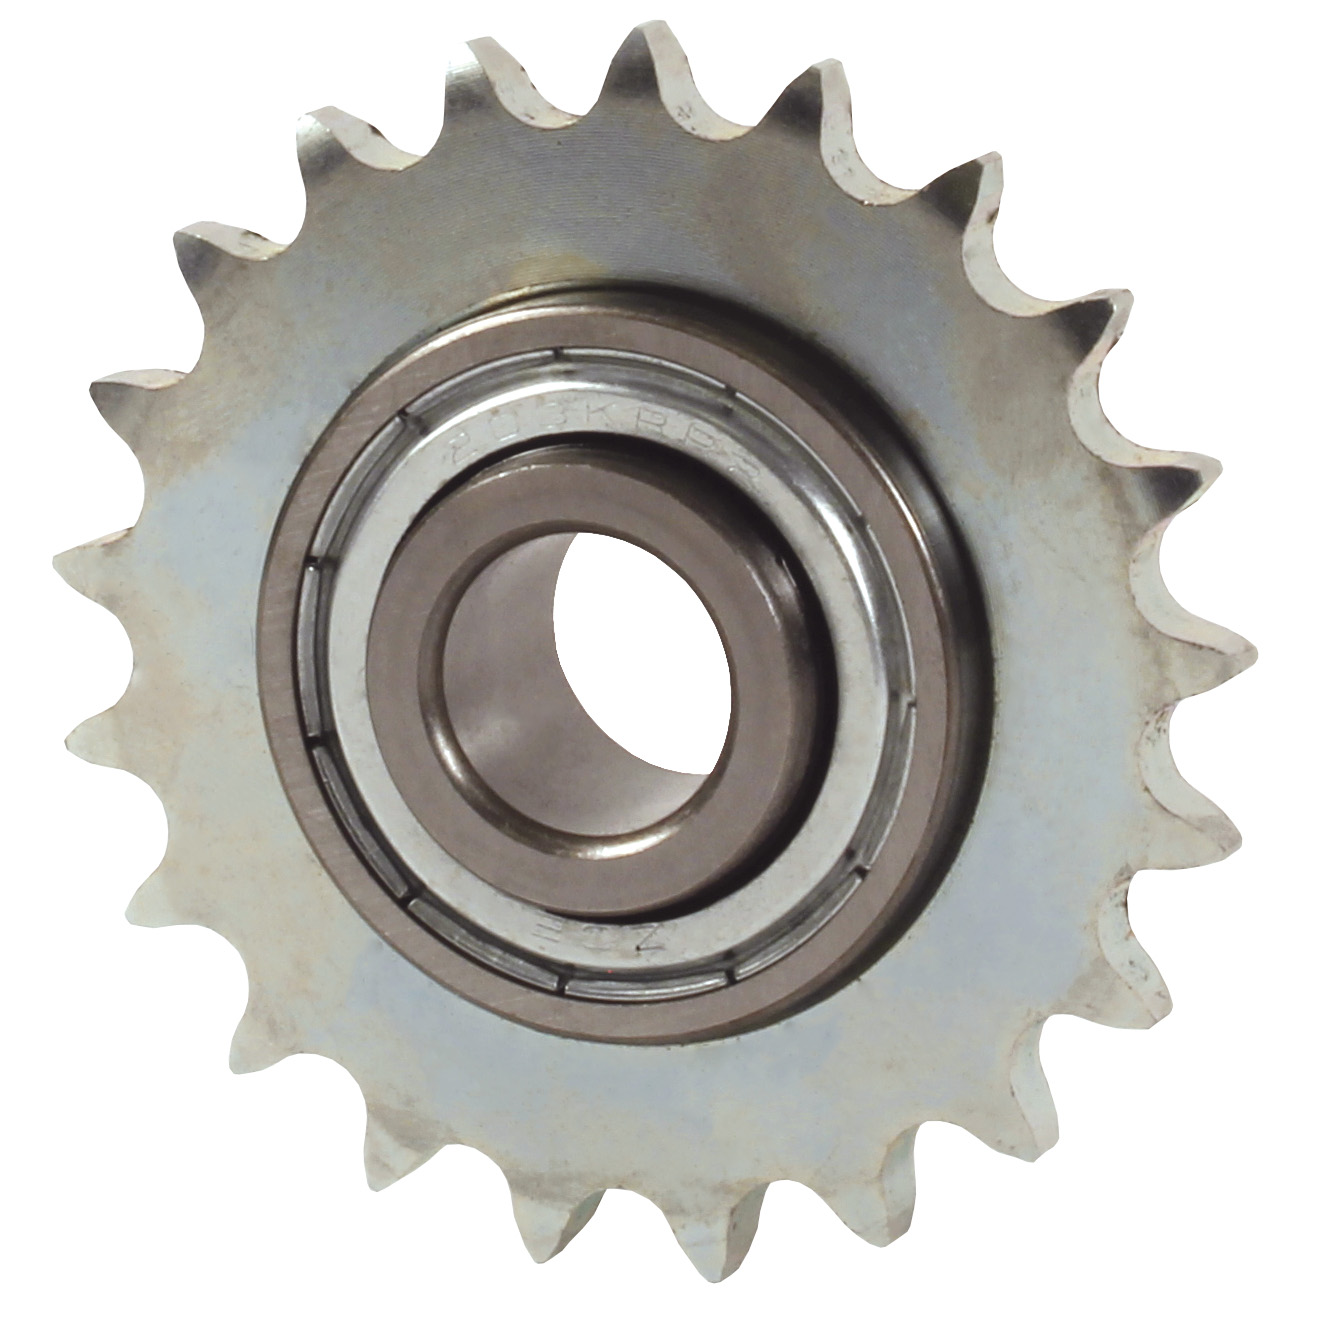 Chain idler sprocket - Chain idler sprocket - Plastic - Plastic - For use with SBR chains